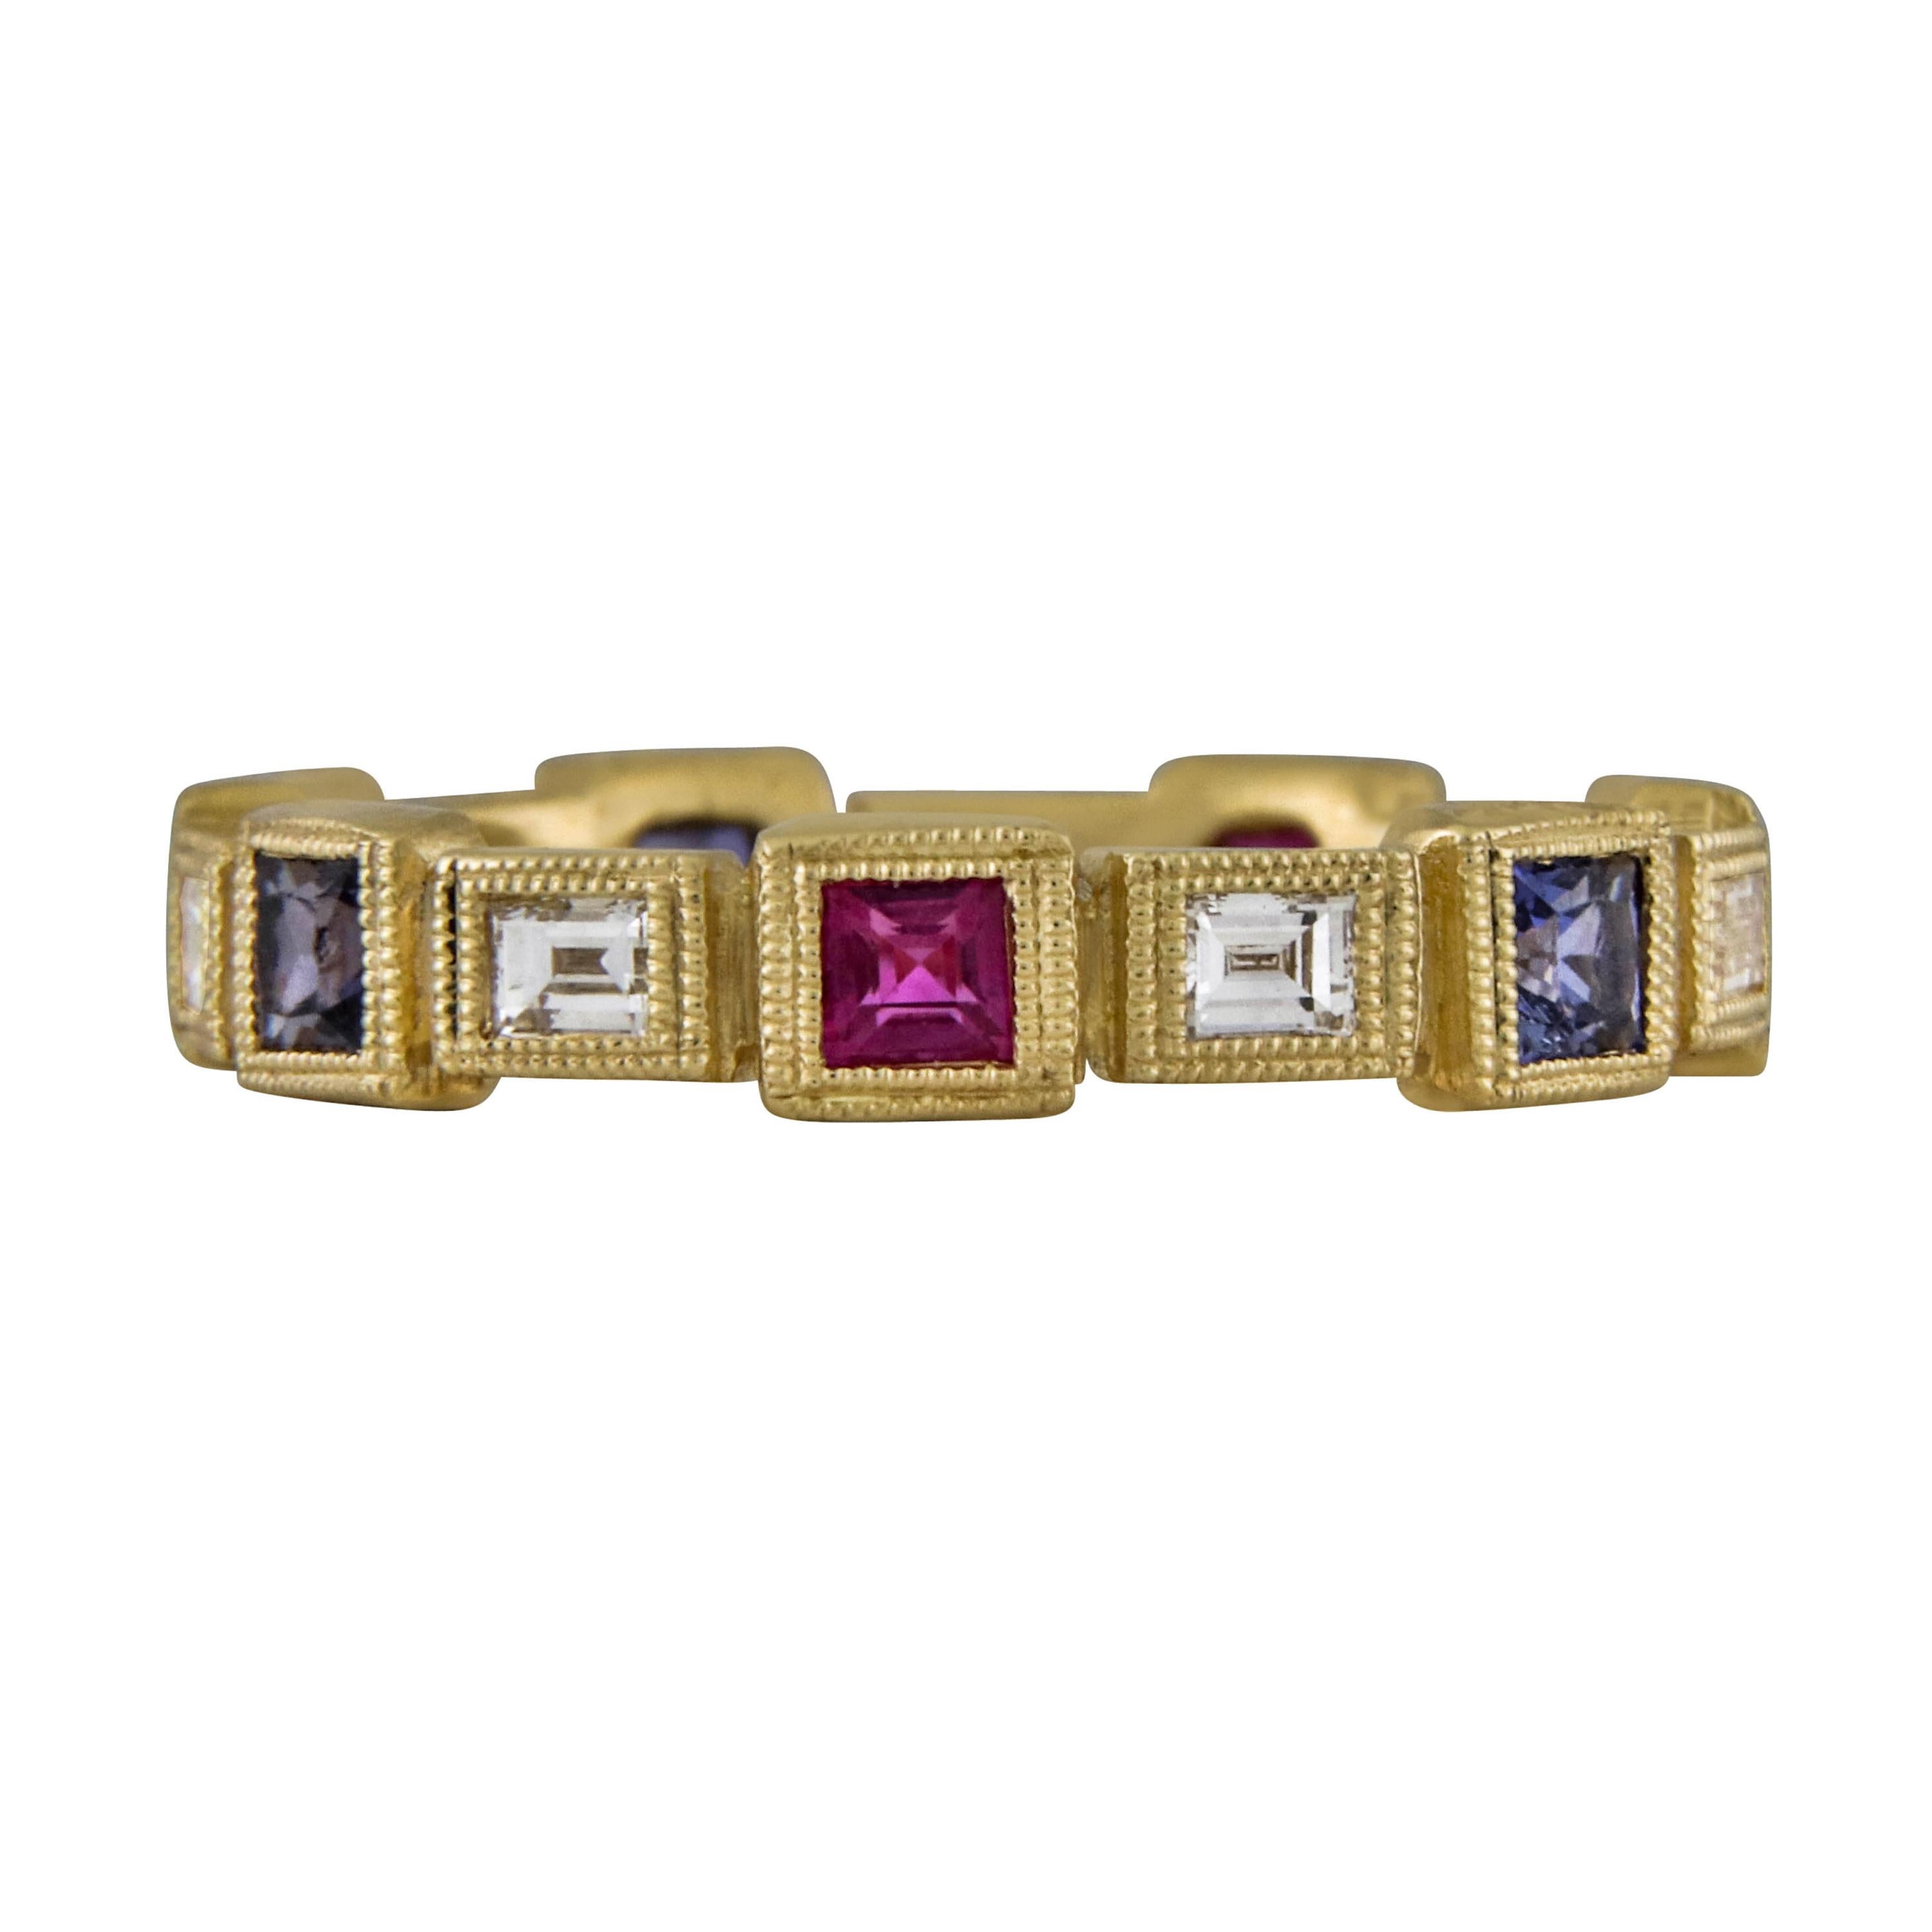 Featured is a hand crafted 18 karat yellow gold diamond & sapphire ring with 6 baguette diamonds weighing 0.35 carats with 3 red rubies and 3 blue sapphires weighing 0.80 carats 4.70 grams finished with a mill grained trim and a lightly brushed